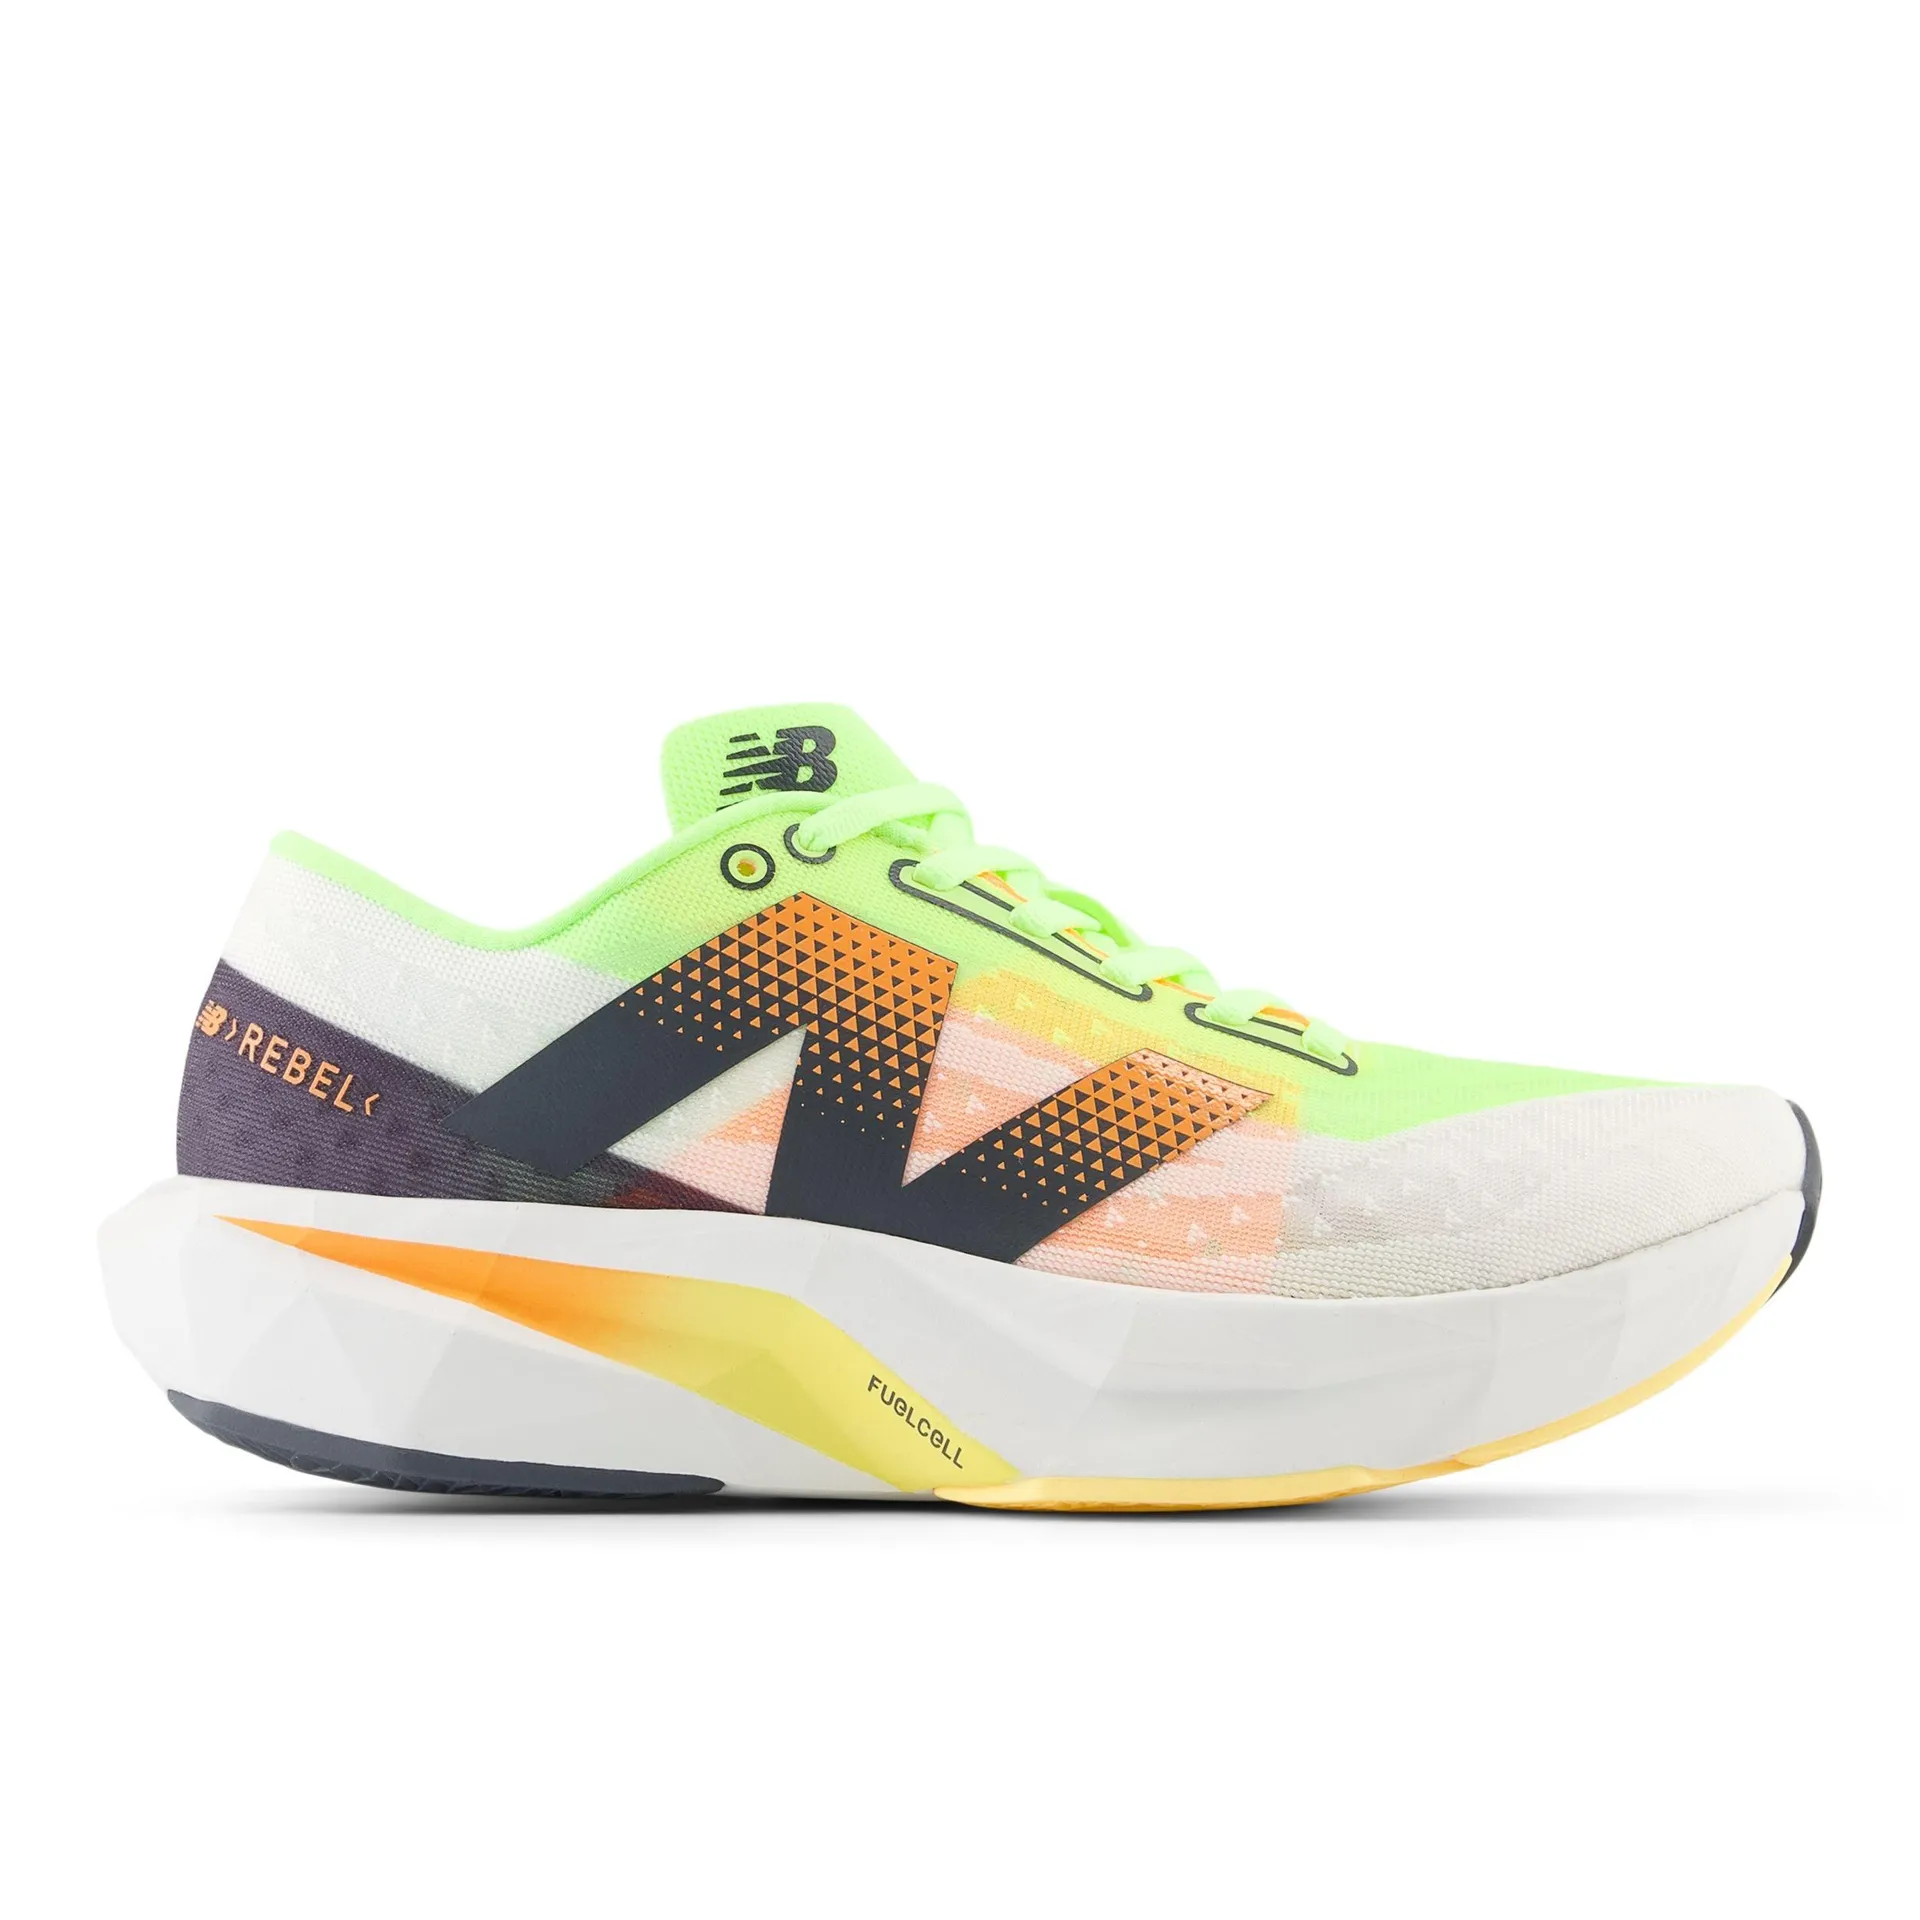 New Balance Women's Fuelcell Rebel V4 Running Shoes